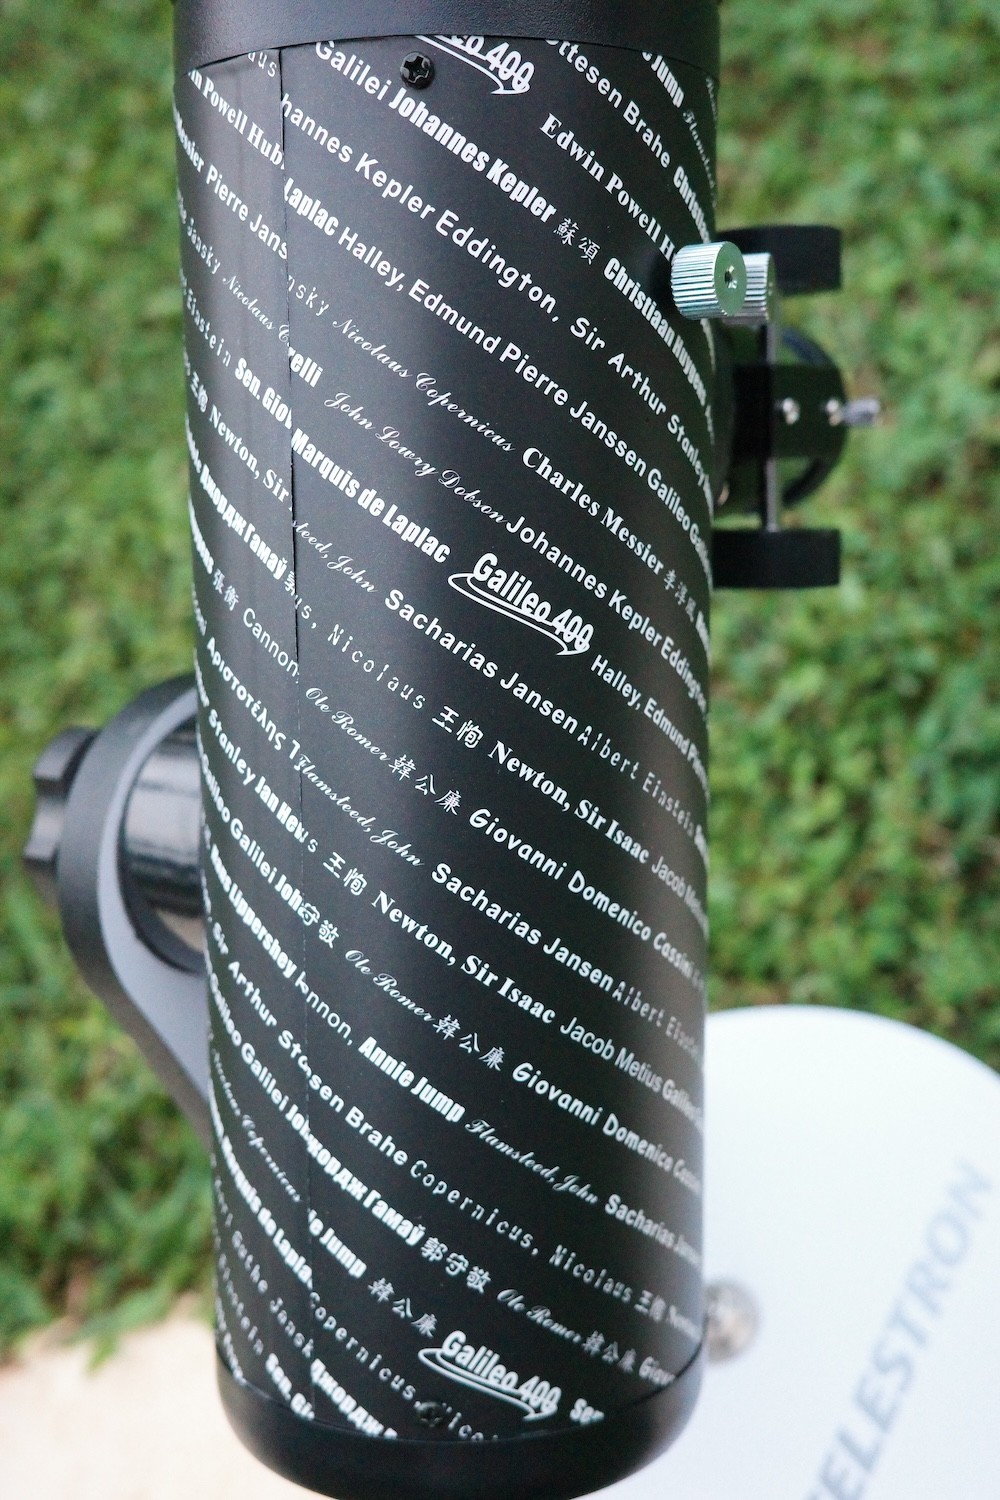 Names of famous astronomers wrapped in the optical tube of Celestron Firstscope 76EQ